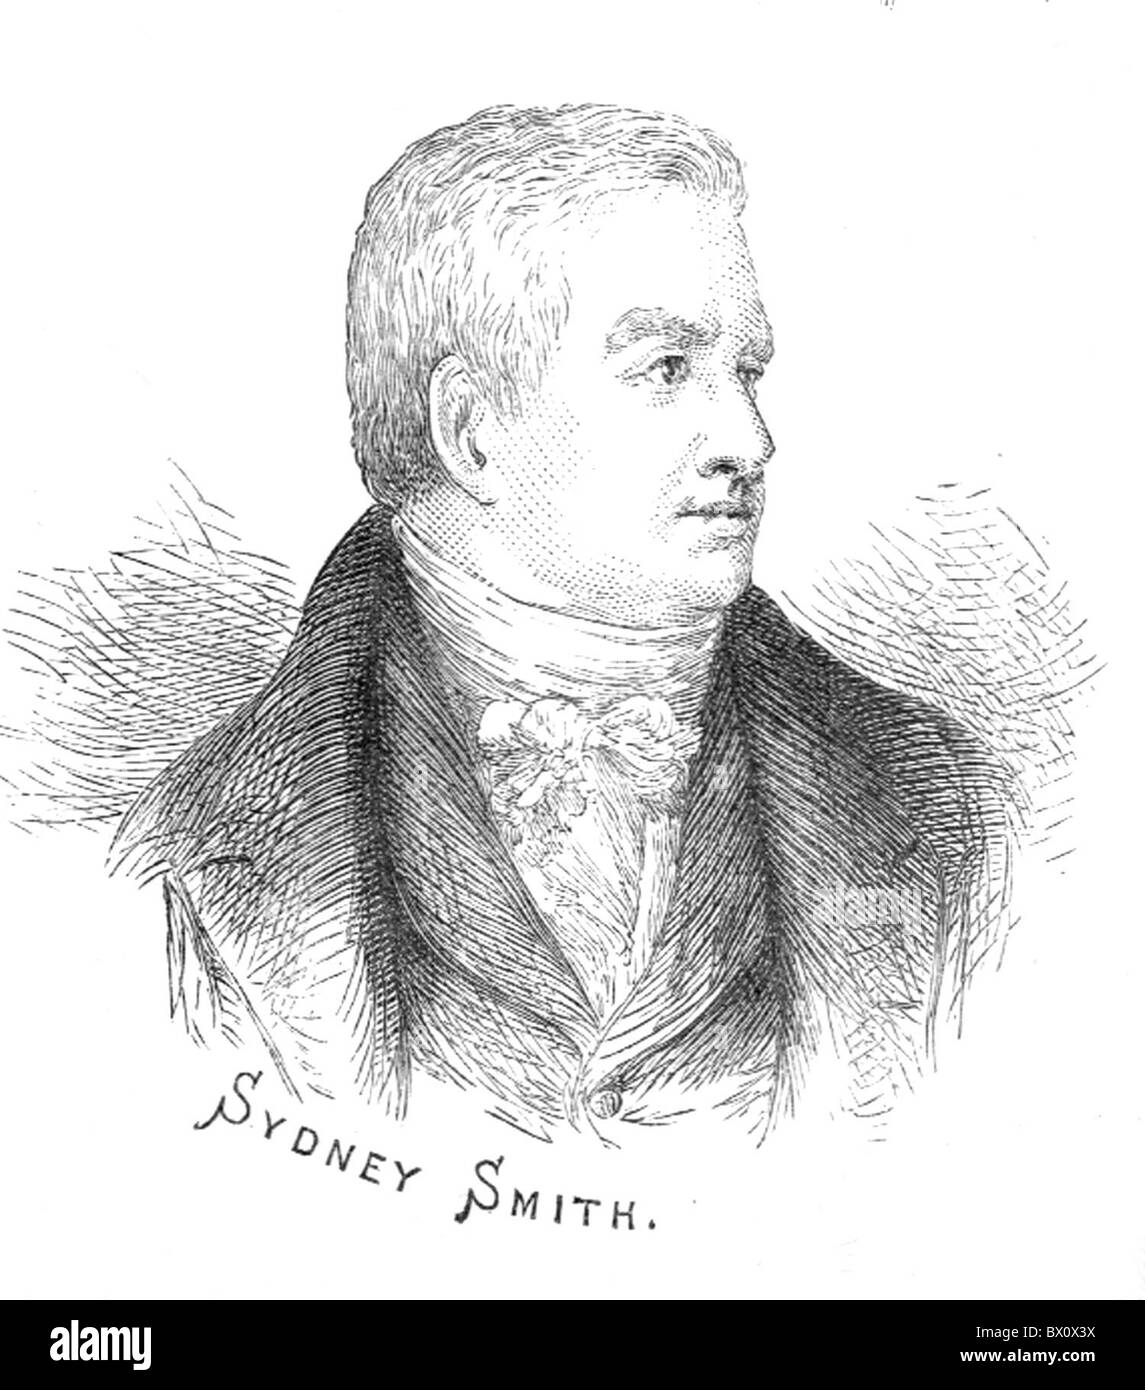 Archive image of historical literary figures. This is Sydney Smith. Sydney Smith (3 June 1771 – 22 February 1845) was an English wit, writer and Anglican cleric. From the archives of Press Portrait Service (formerly Press Portrait Bureau) Stock Photo